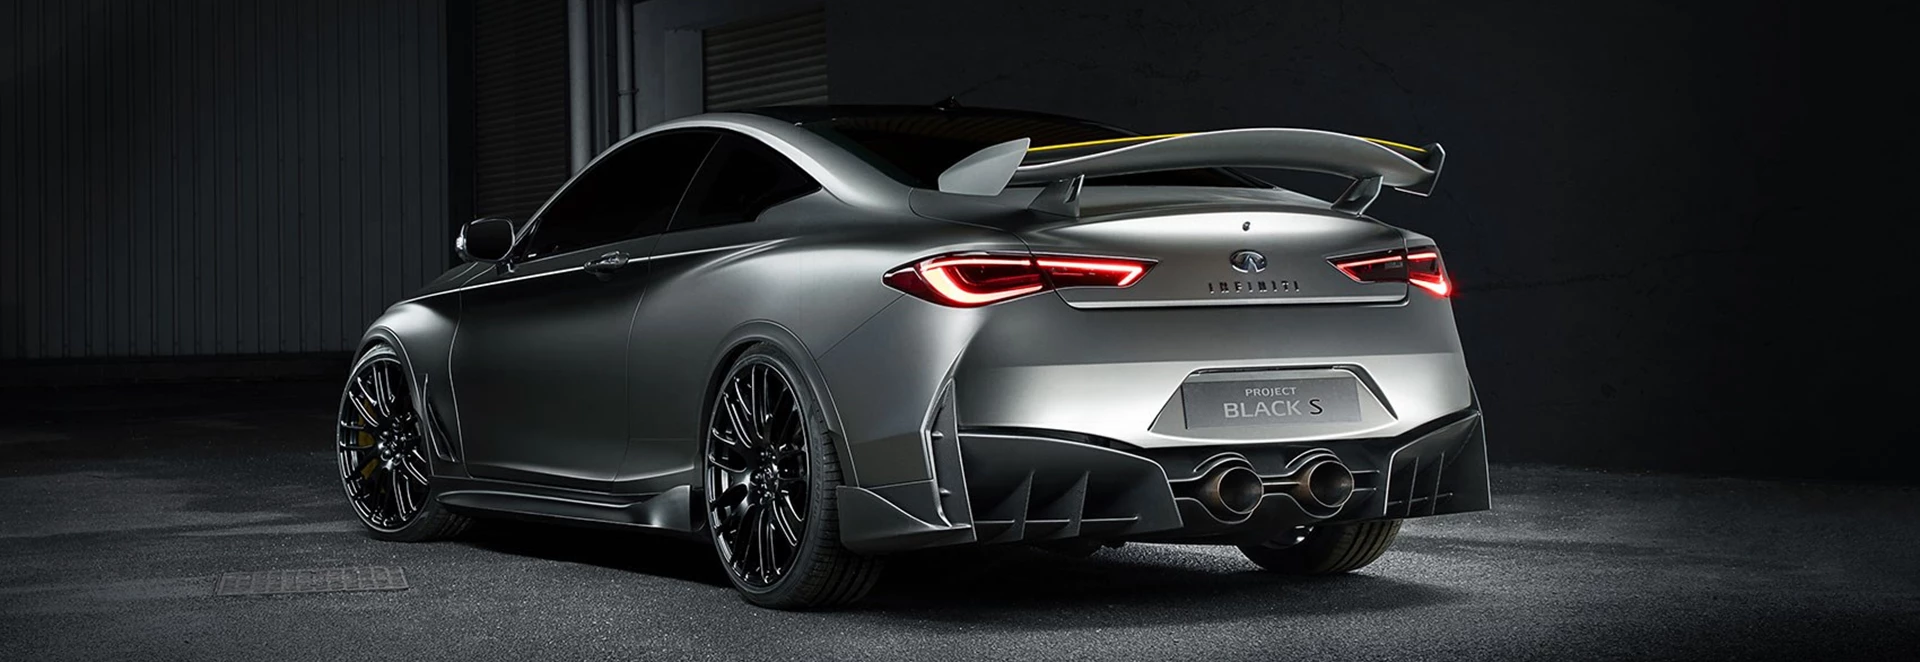 INFINITI marks Renault F1 partnership with Q60 Black S concept